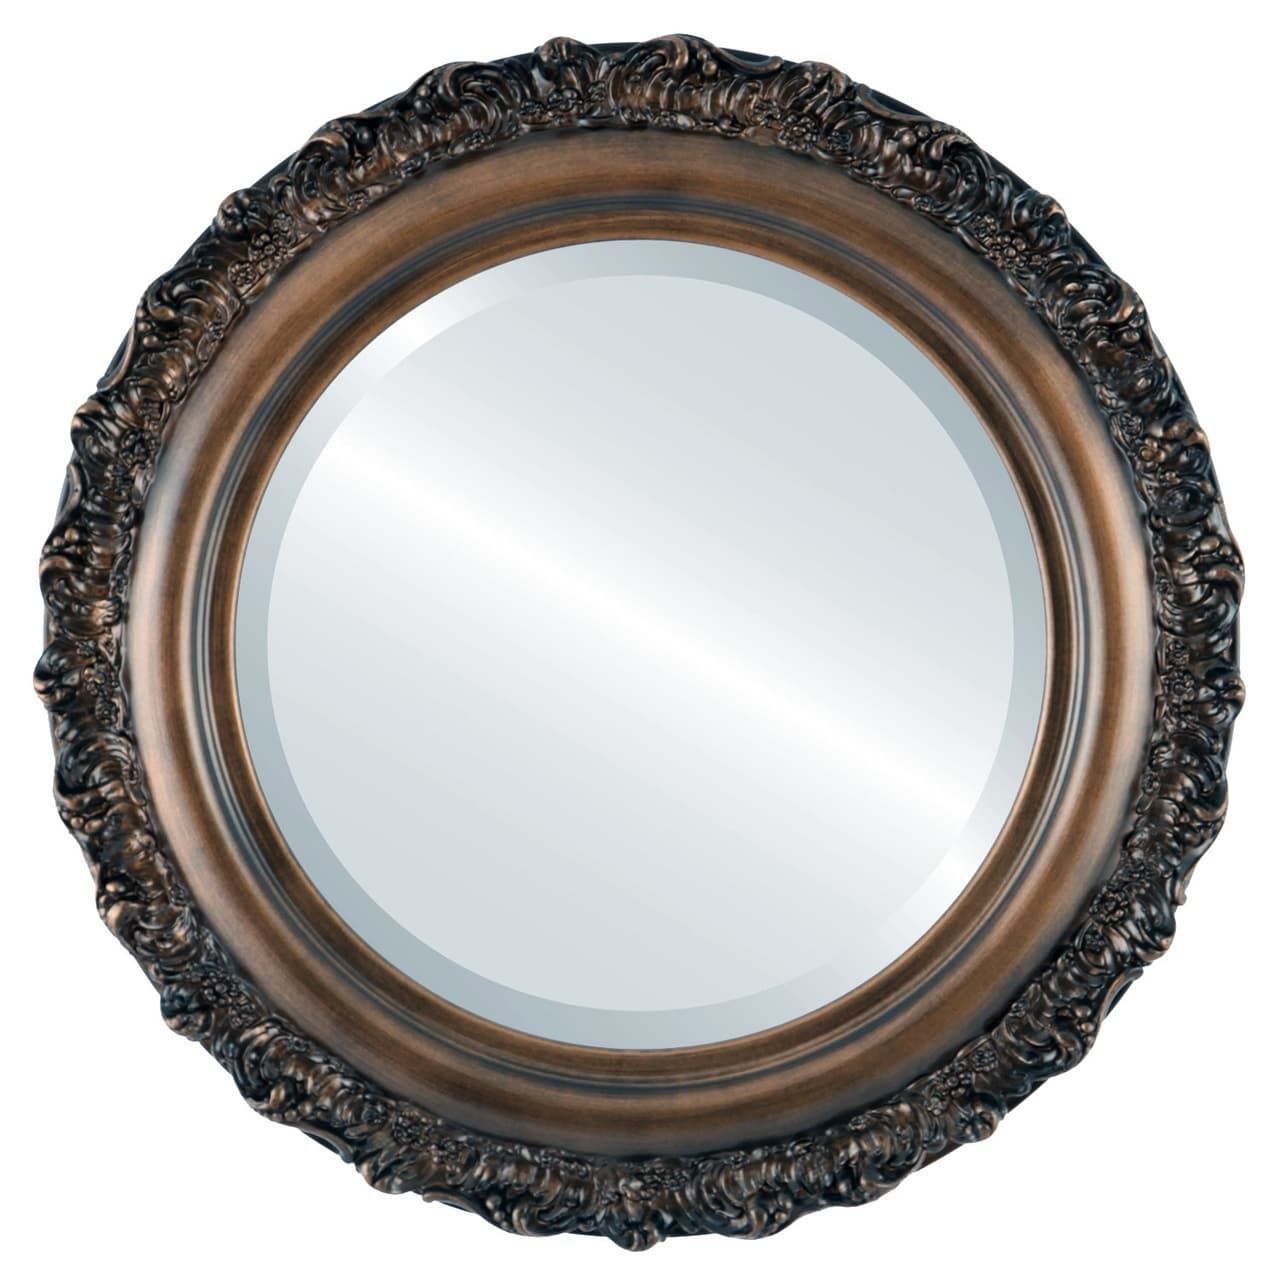 The Oval And Round Mirror Store Venice Framed Round Mirror In Rubbed For Antique Gold Leaf Round Oversized Wall Mirrors (View 5 of 15)